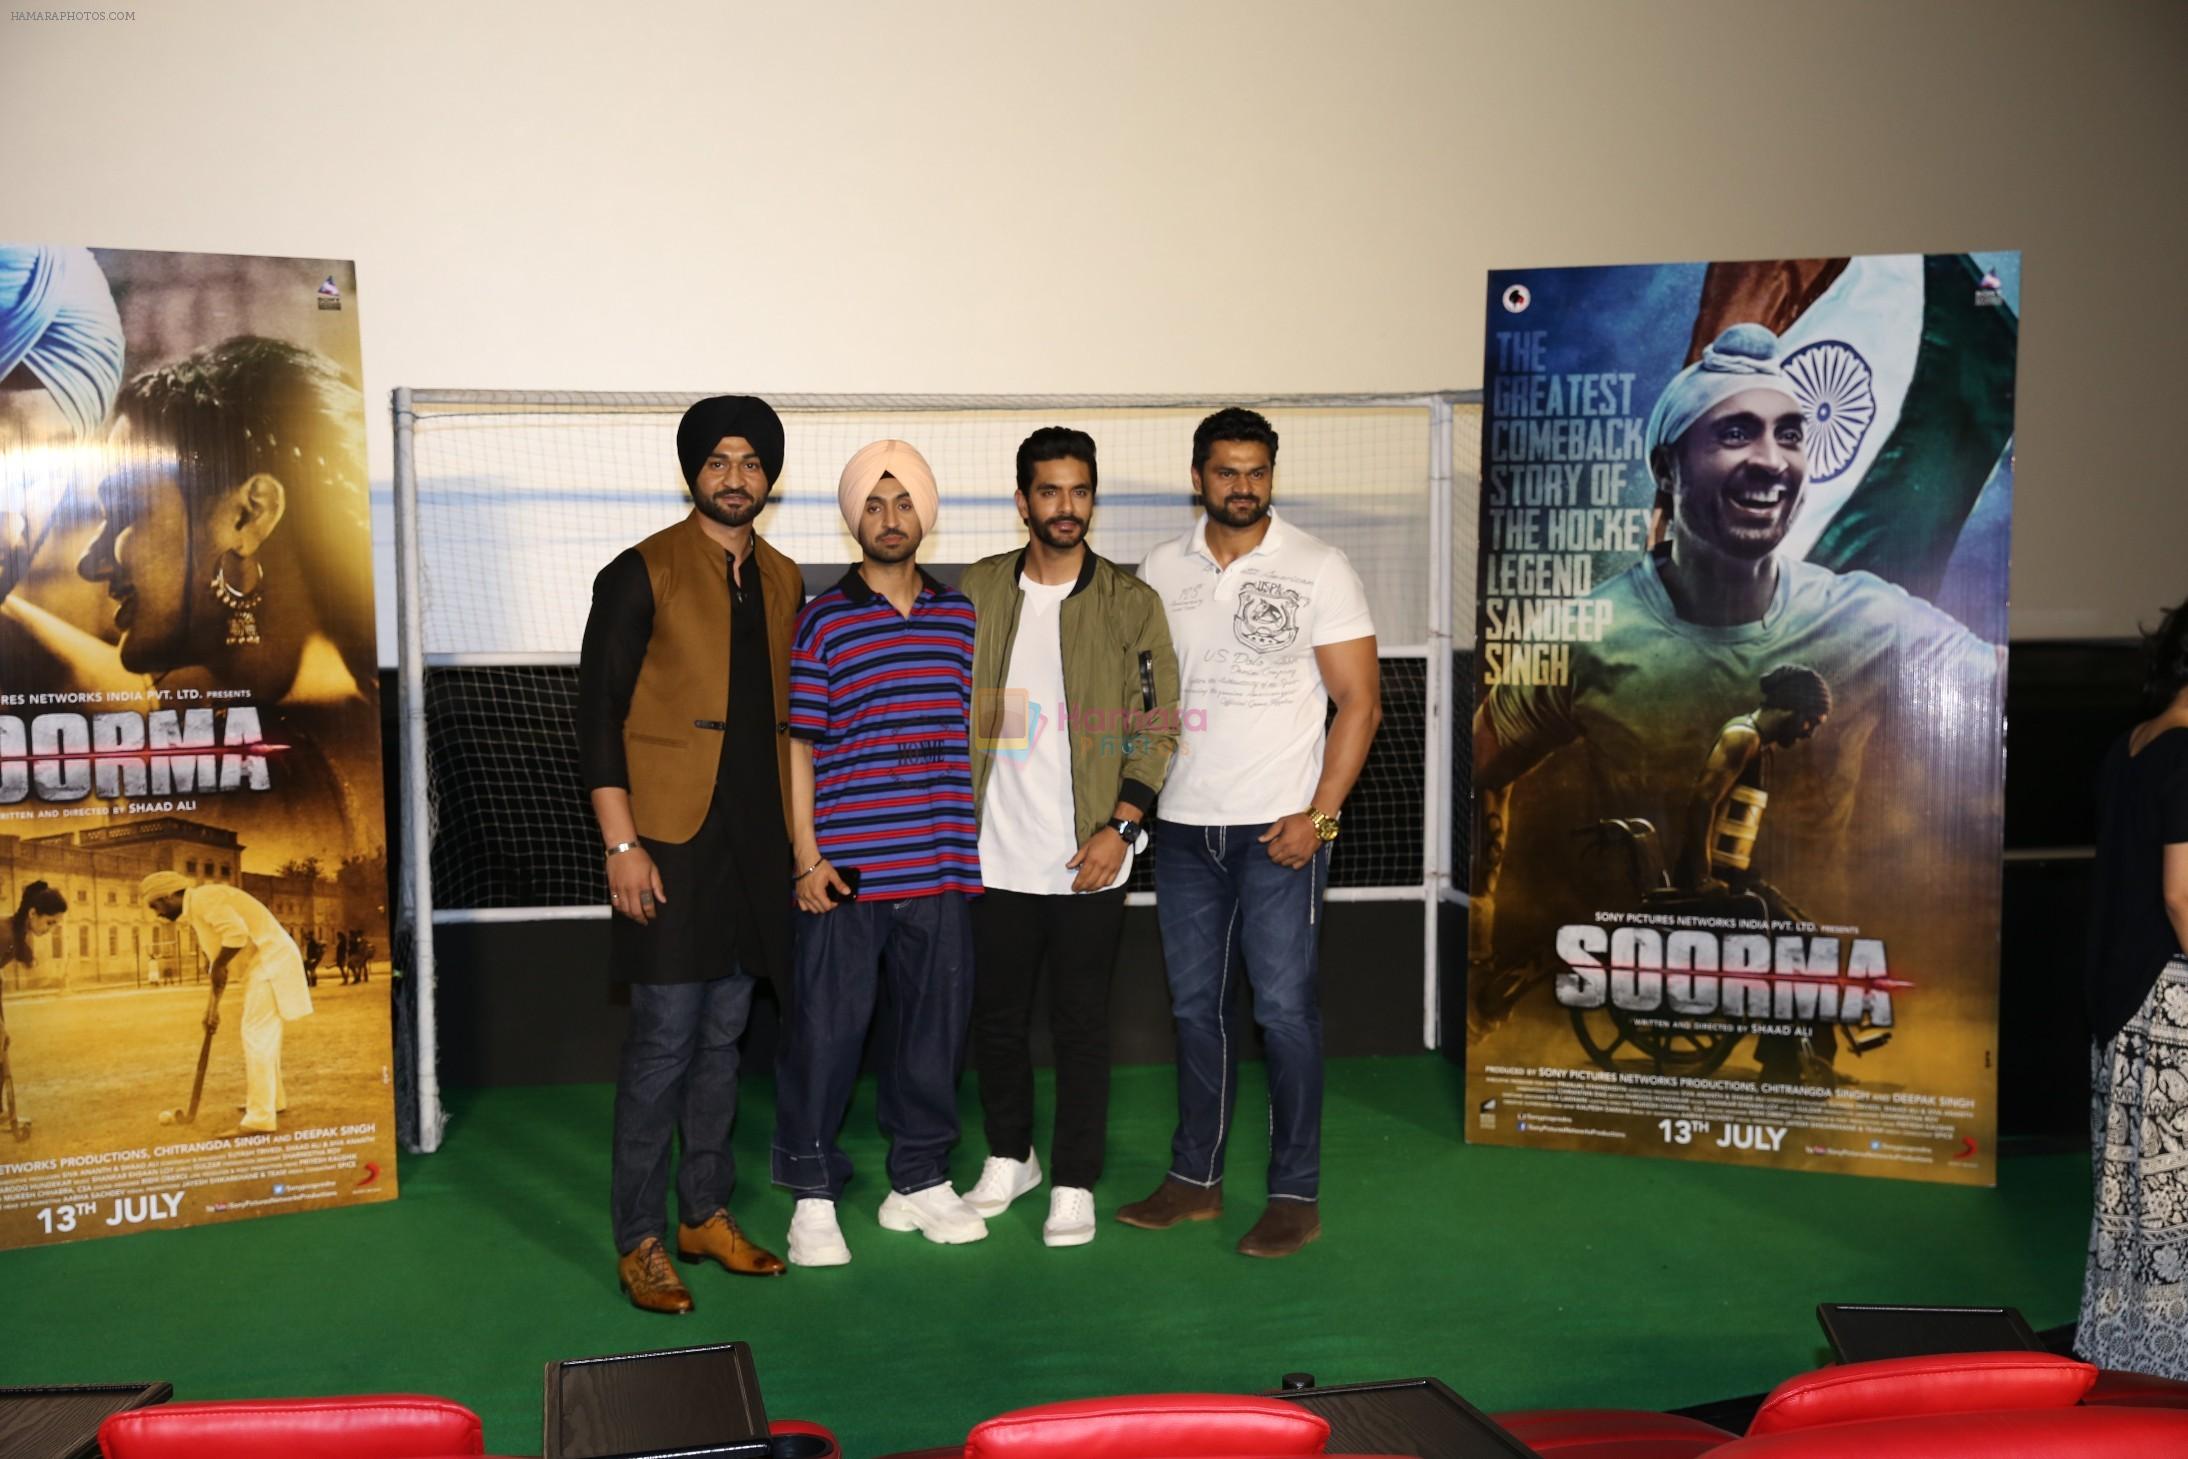 at the Trailer launch of film Soorma at pvr juhu in mumbai on 11th June 2018